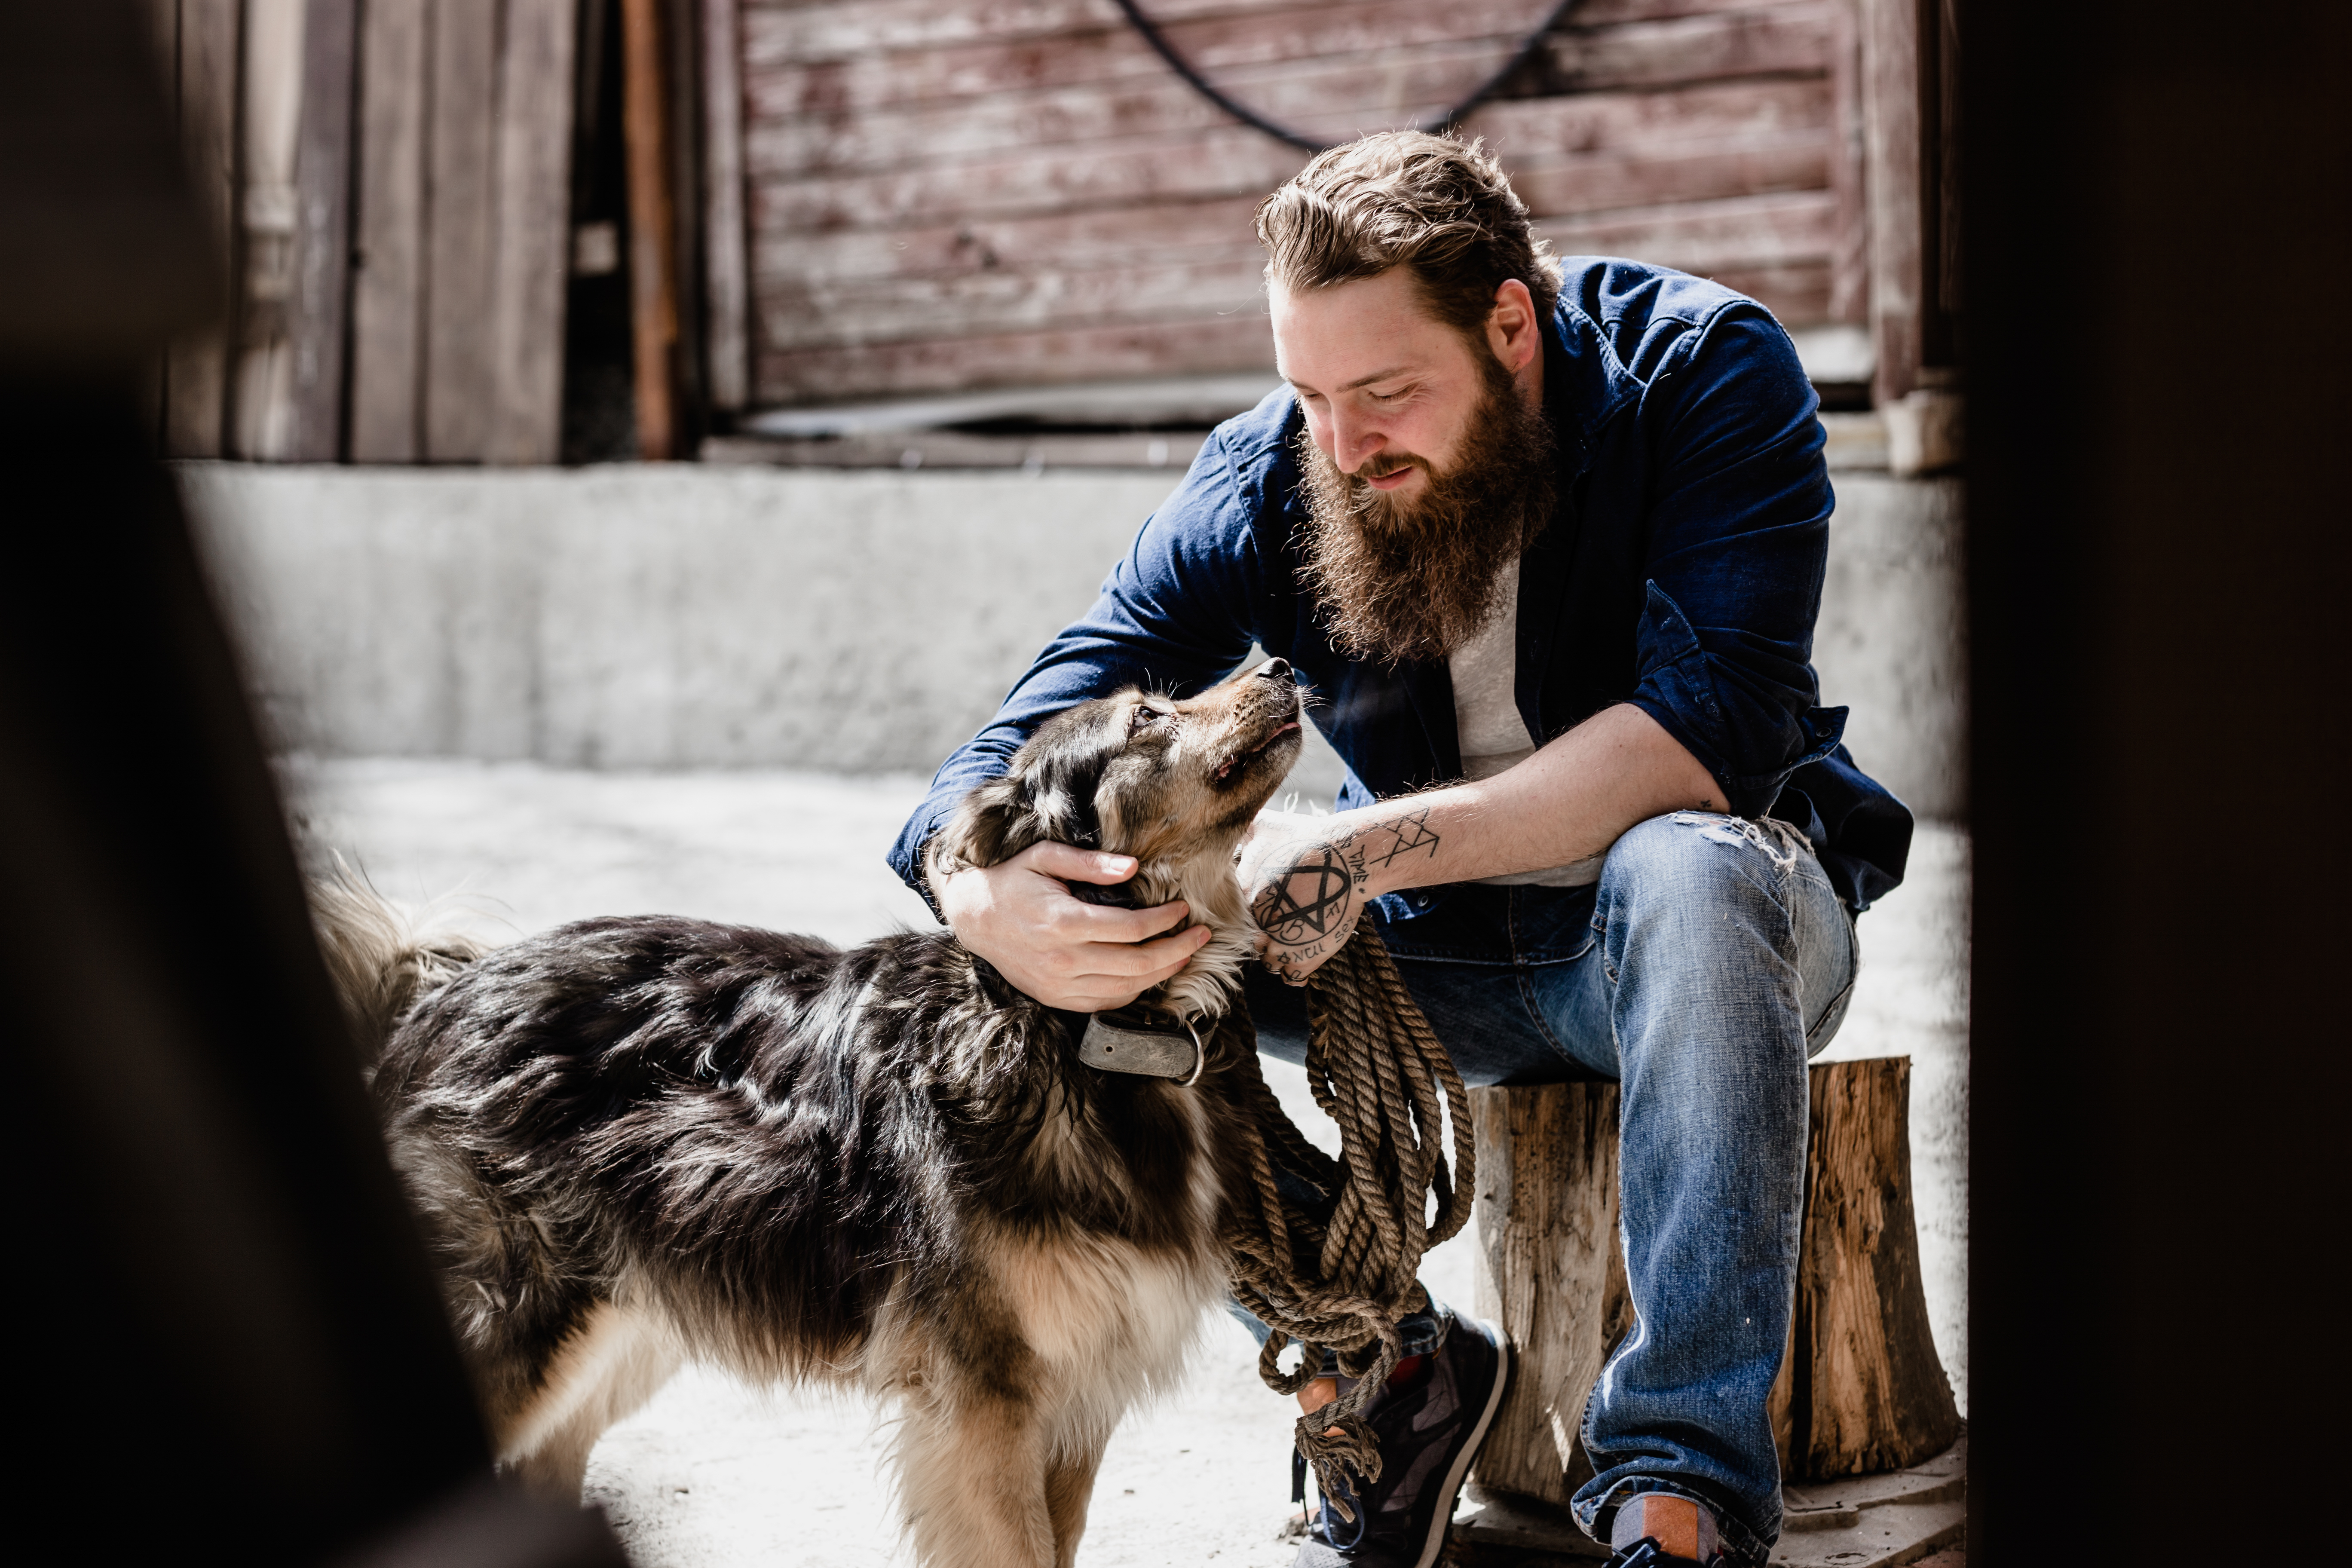 Man with beard sitting in front of his dog